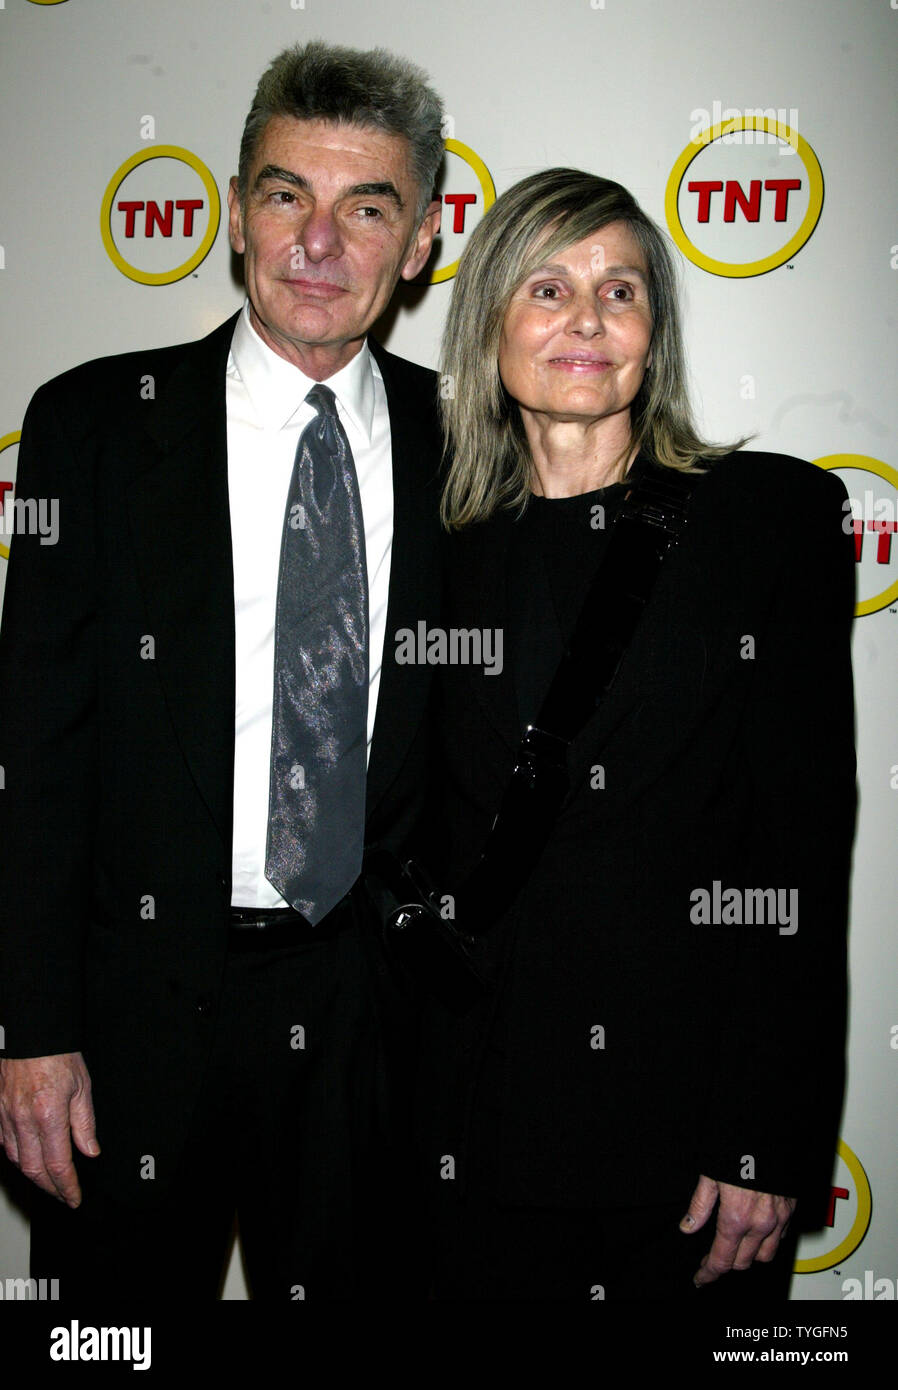 Richard Benjamin and wife Paula Prentiss pose for pictures at the special screening of TNT's 'The Goodbye Girl' at Cinema 1 in New York on January 12, 2004.   (UPI Photo/Laura Cavanaugh) Stock Photo